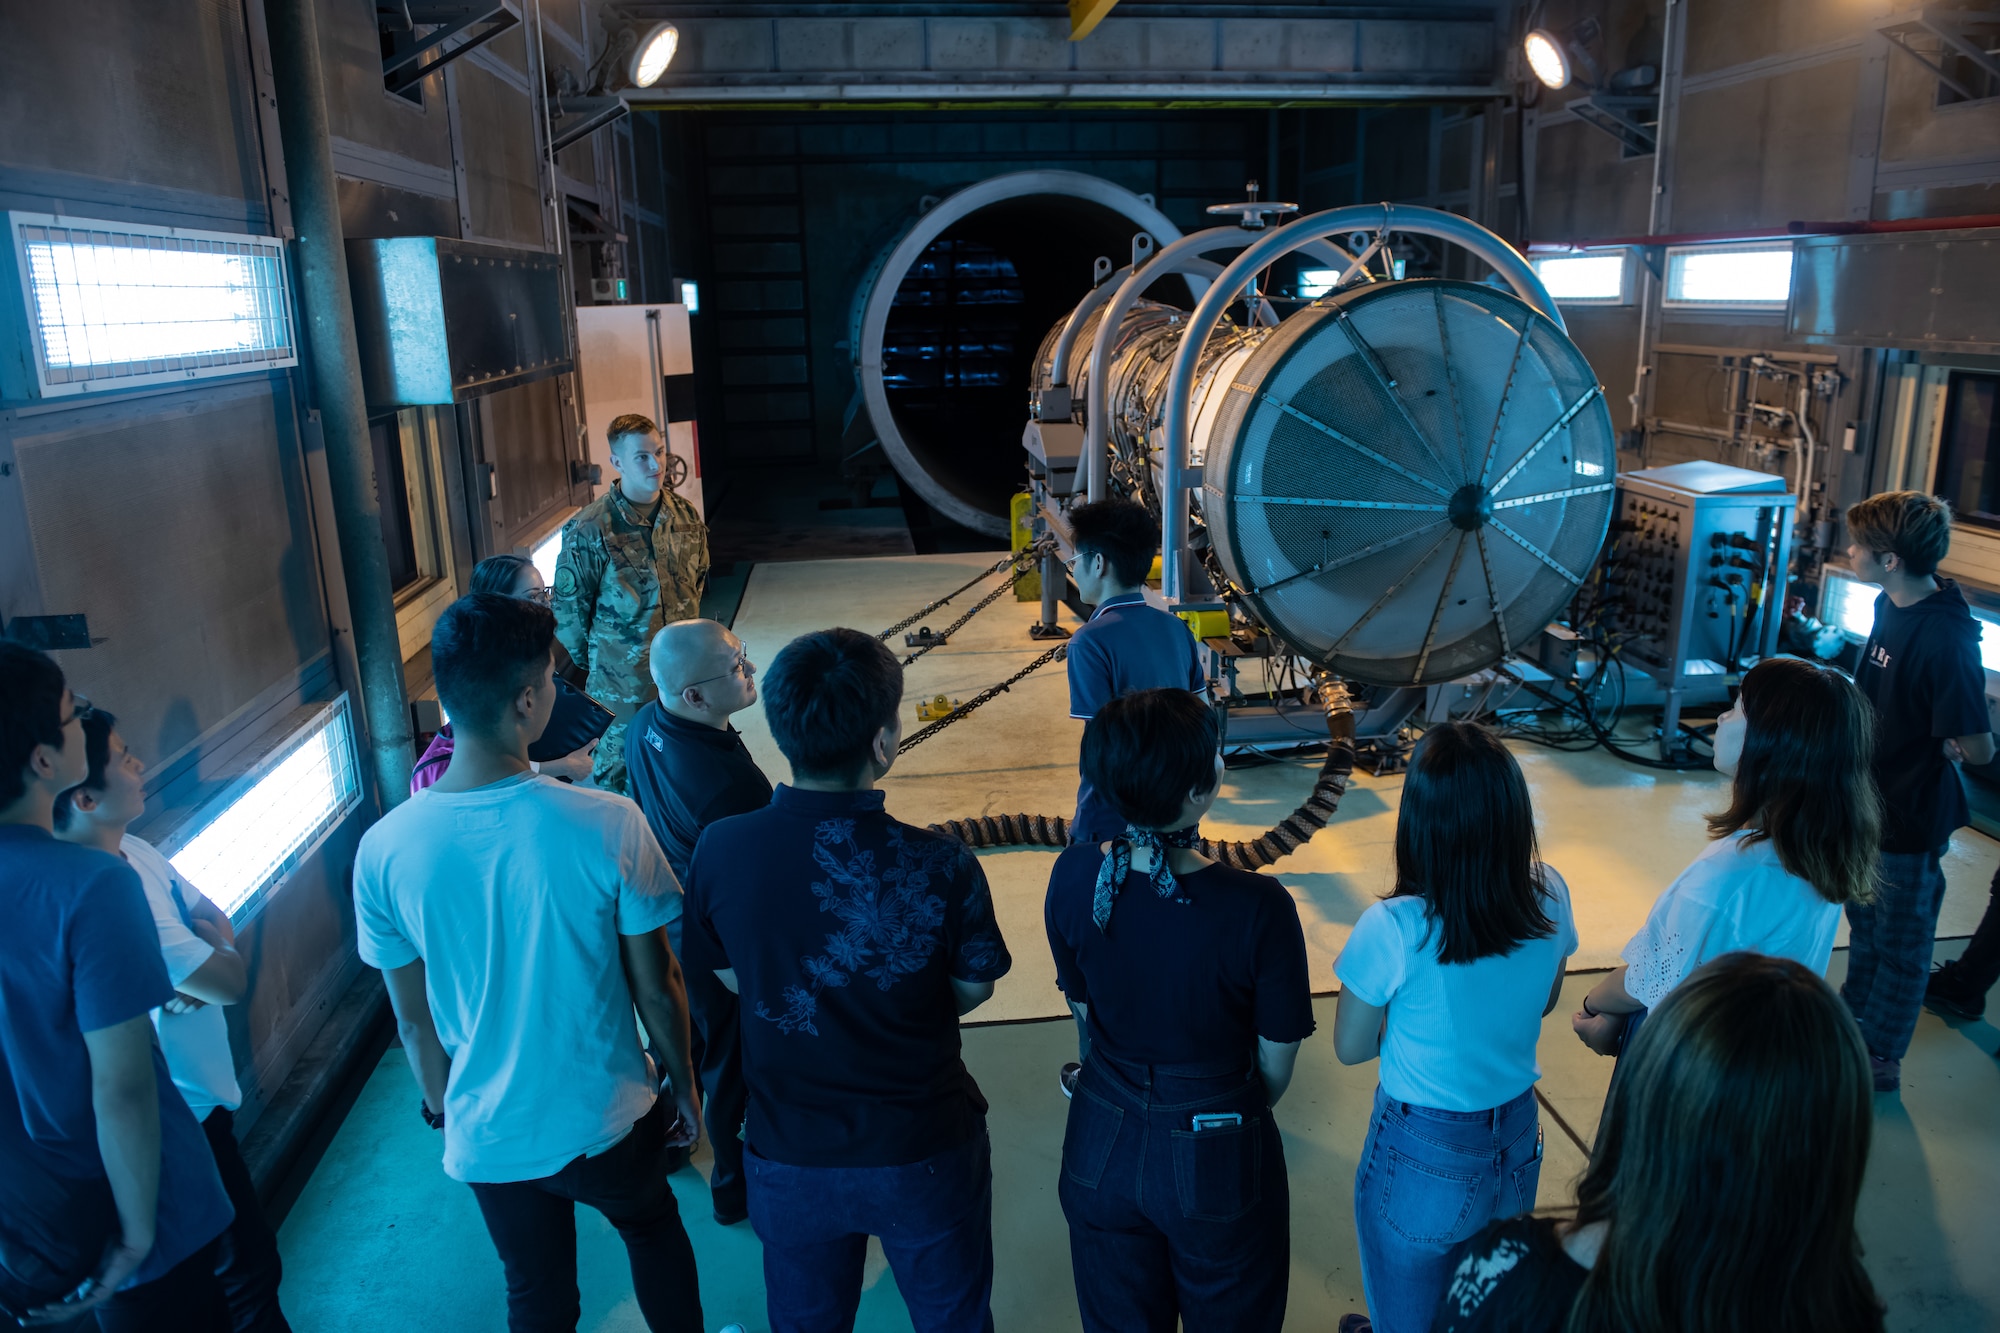 U.S. Staff Sgt. Evan Rogan, 18th Component Maintenance Squadron centralized repair facility craftsman, talks to students about engine test during Air Force Immersion Day, Sept. 23, 2019, at Kadena Air Base, Japan. Air Force Immersion Day is a new community engagement program hosted by the base to teach college and vocational students about the 18th Wing’s role in supporting and defending U.S. and Japanese alliance. (U.S. Air Force photo by Staff Sgt. Micaiah Anthony)